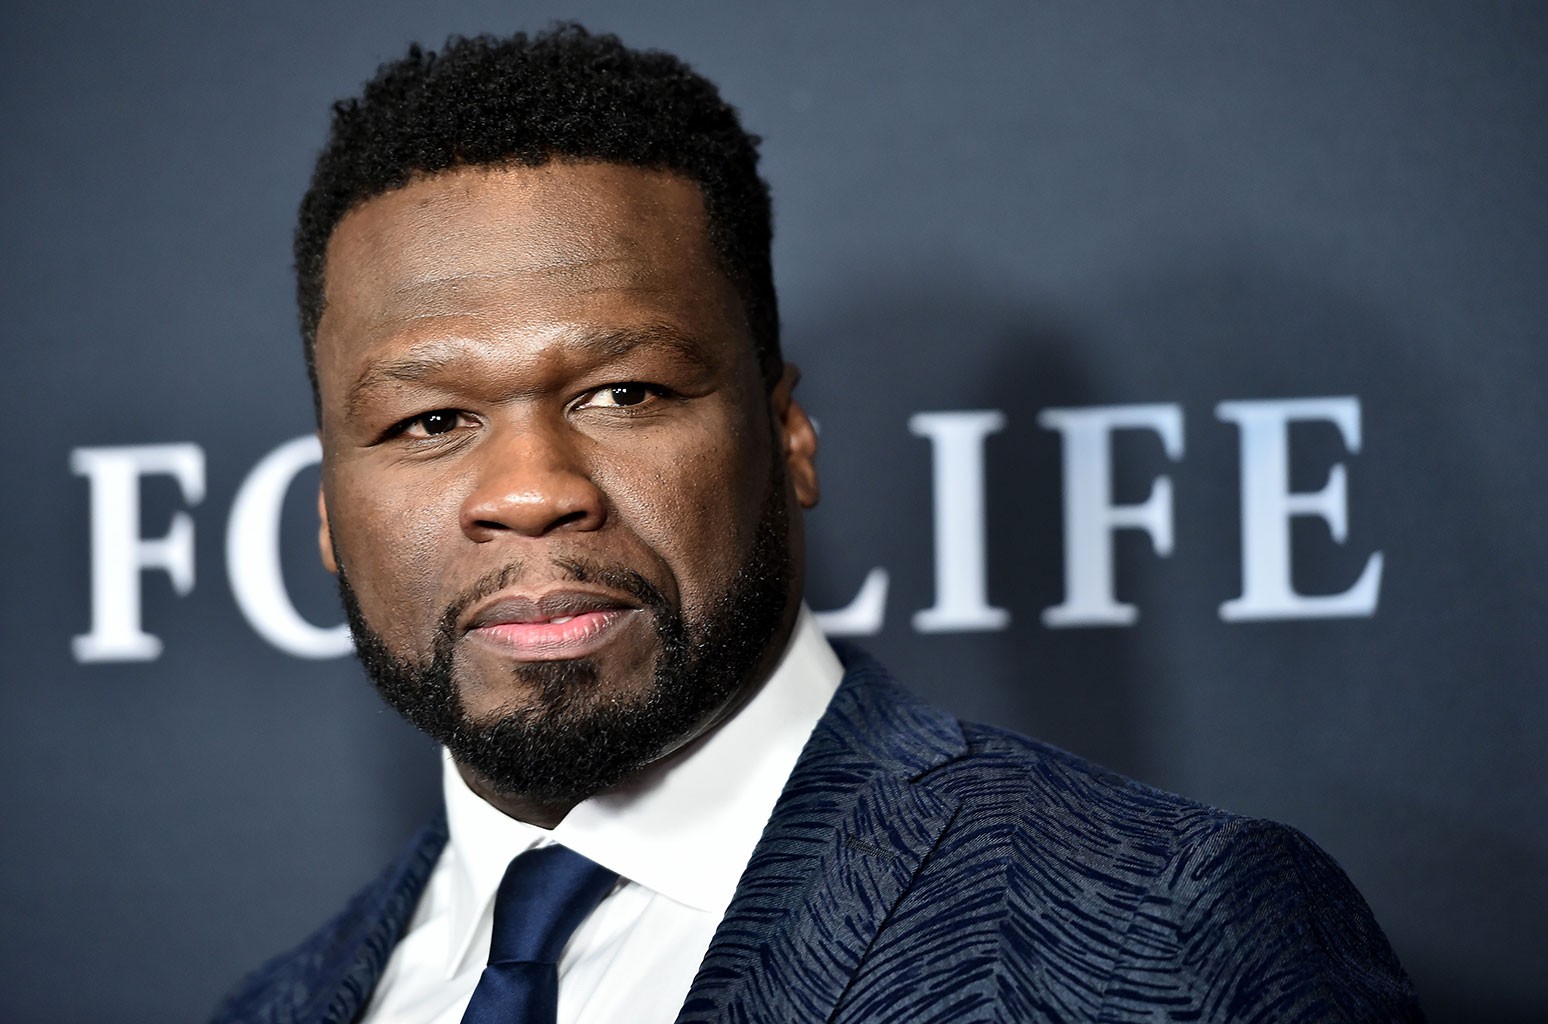 50 Cent Applauds “48 Laws Of Power” Author’s “Realistic Outlook”